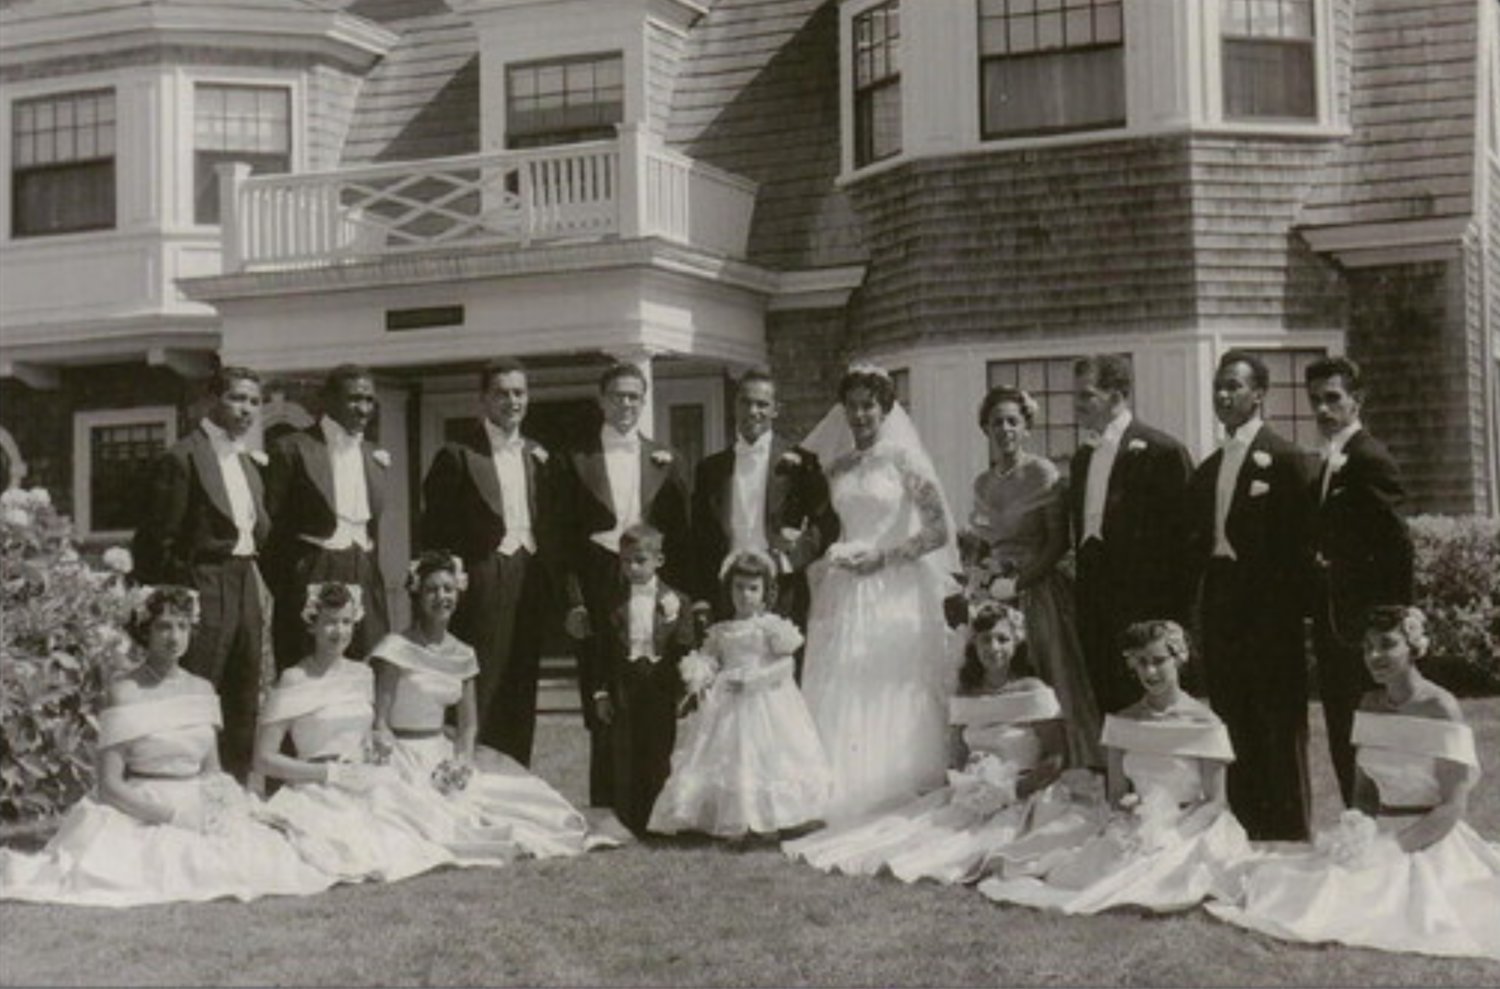 The wedding party of Norma Cabral and Albert Texeira on Cliff Road.